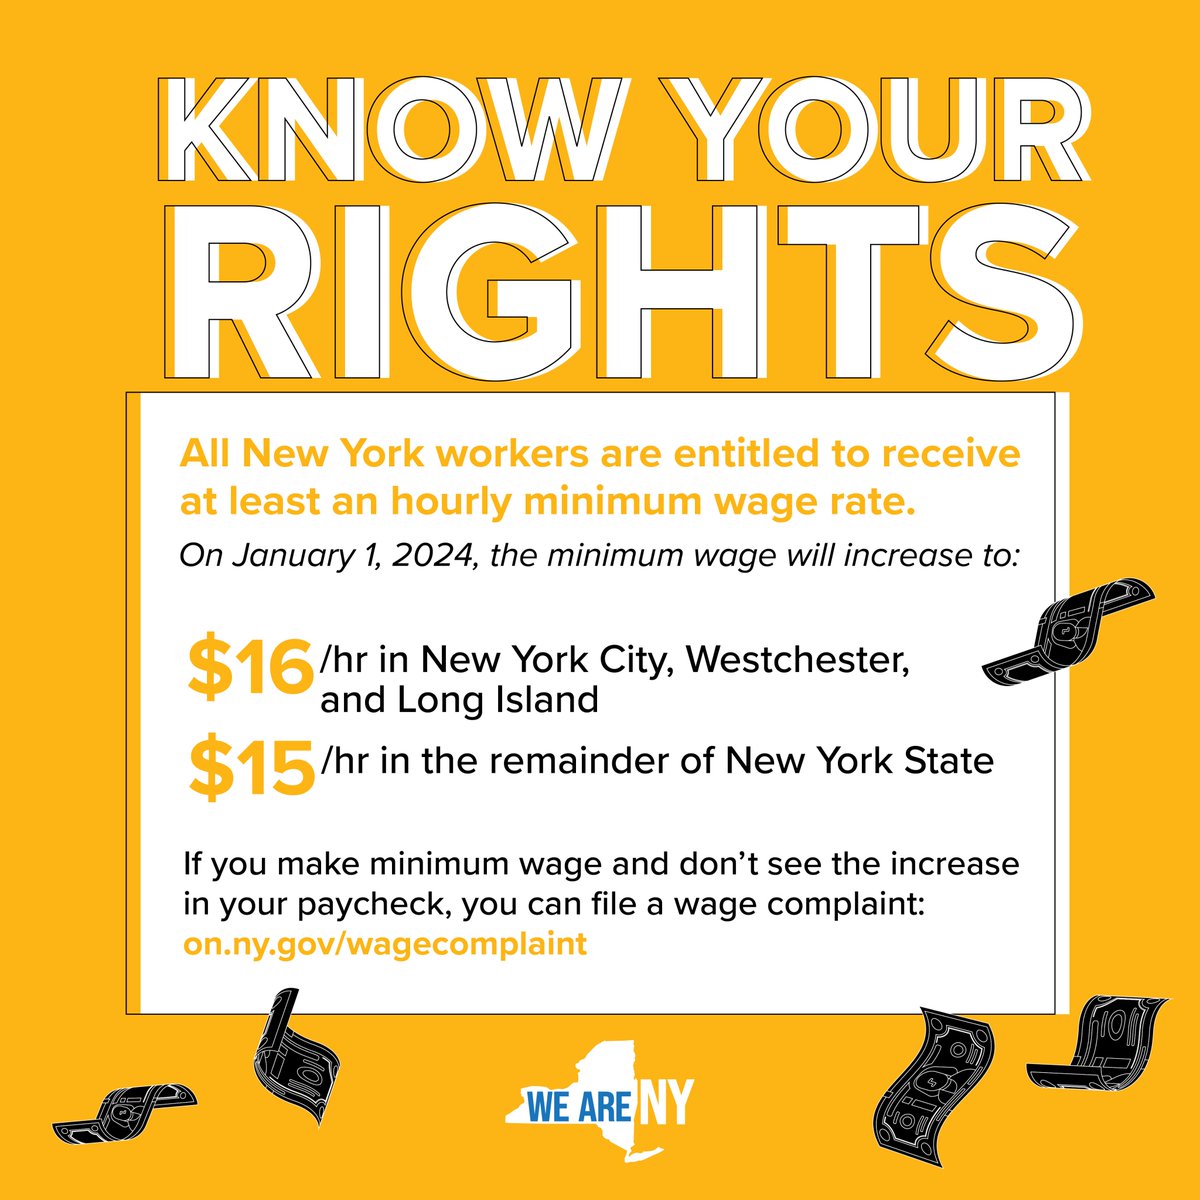 Reminder: New York State's minimum wage has increased since 2023! If you are not getting paid NYS's new minimum wage, call 1-888-4-NYSDOL. Learn more: dol.ny.gov/minimum-wage-0